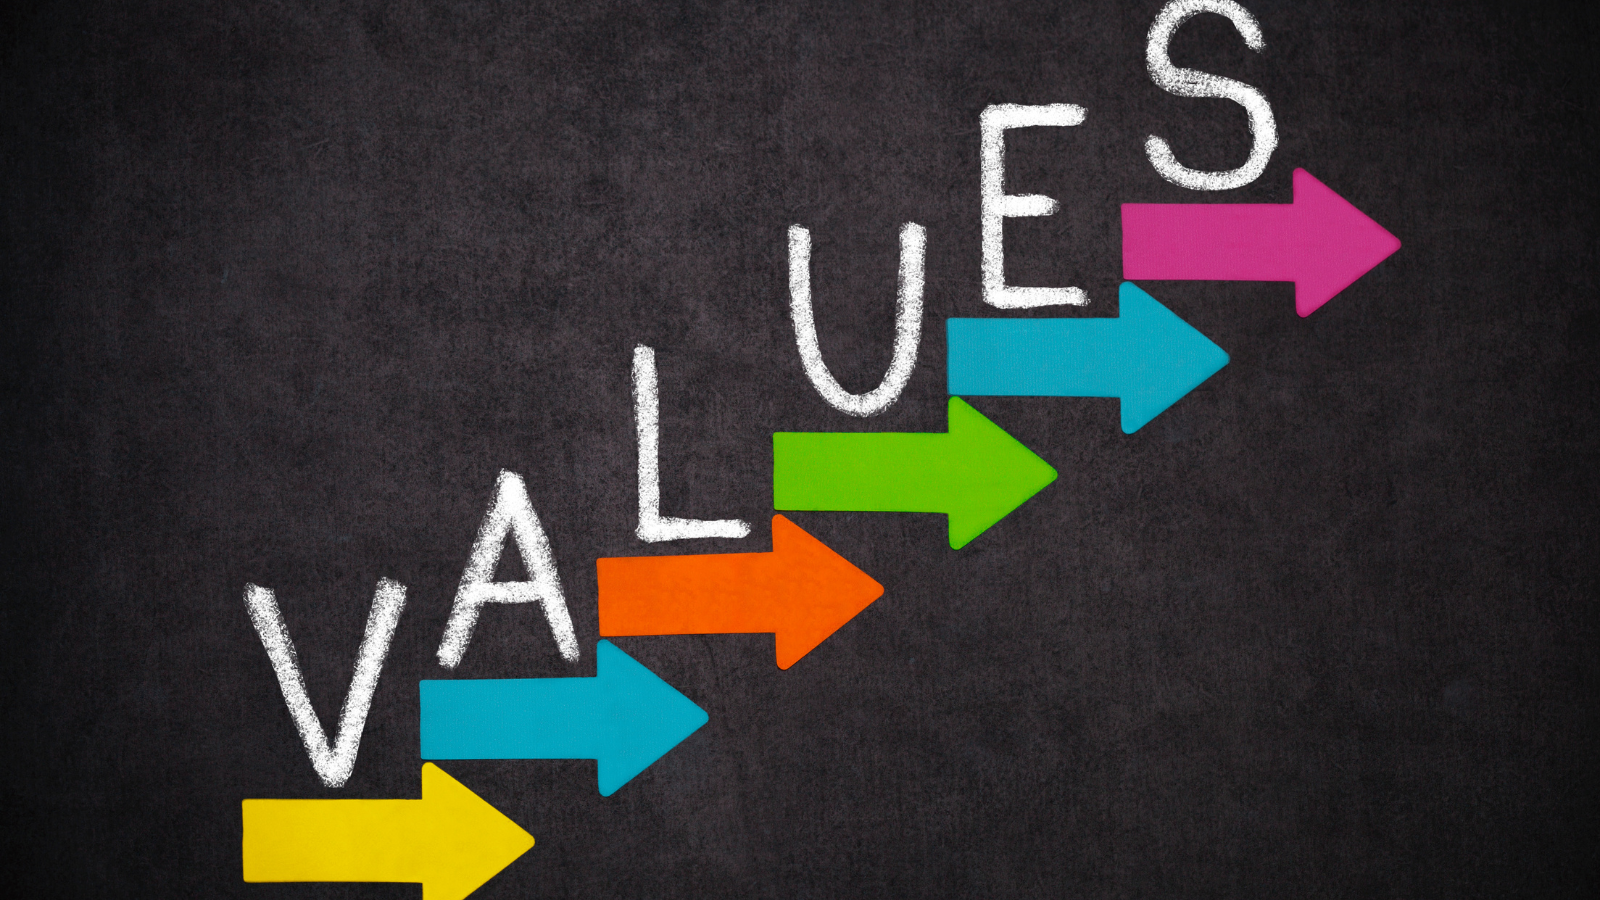 Your Company Has Values, But Do They Translate To Behaviors?